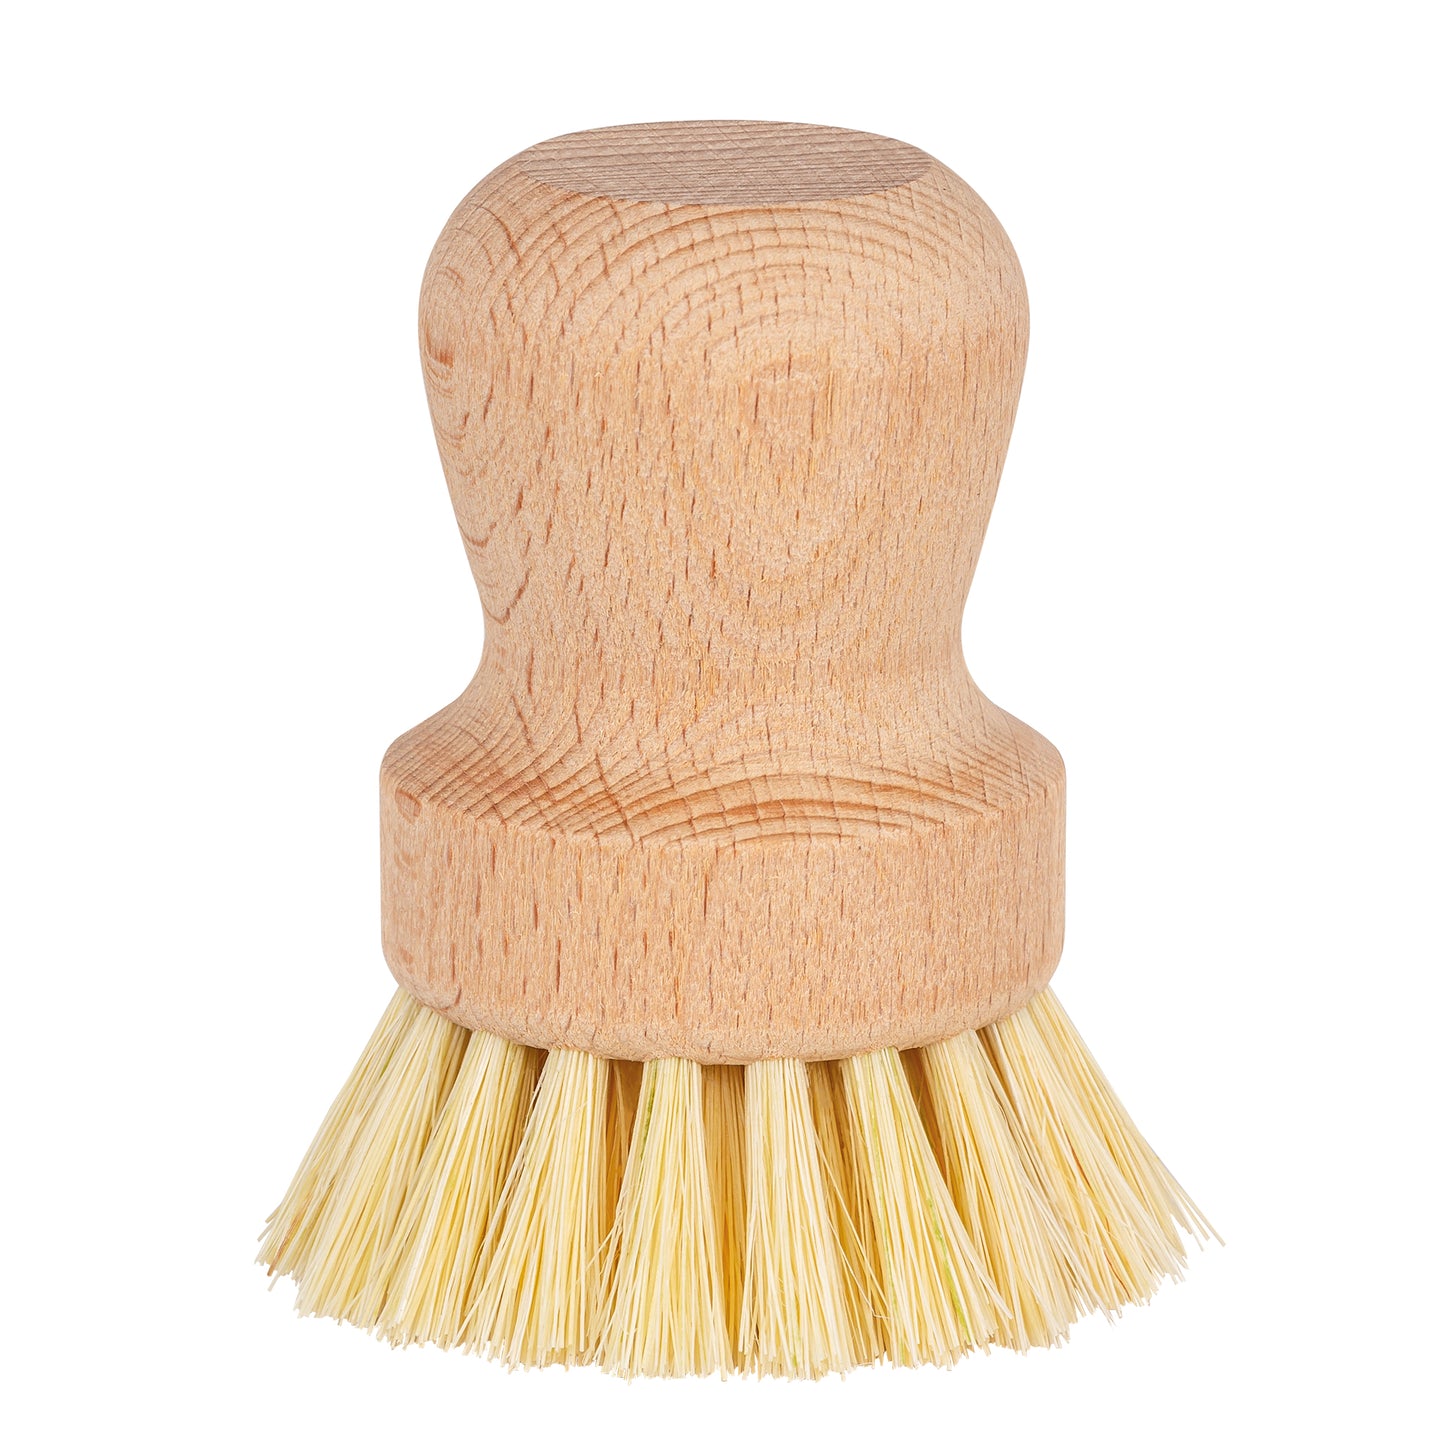 Wooden brush for pots and dishes